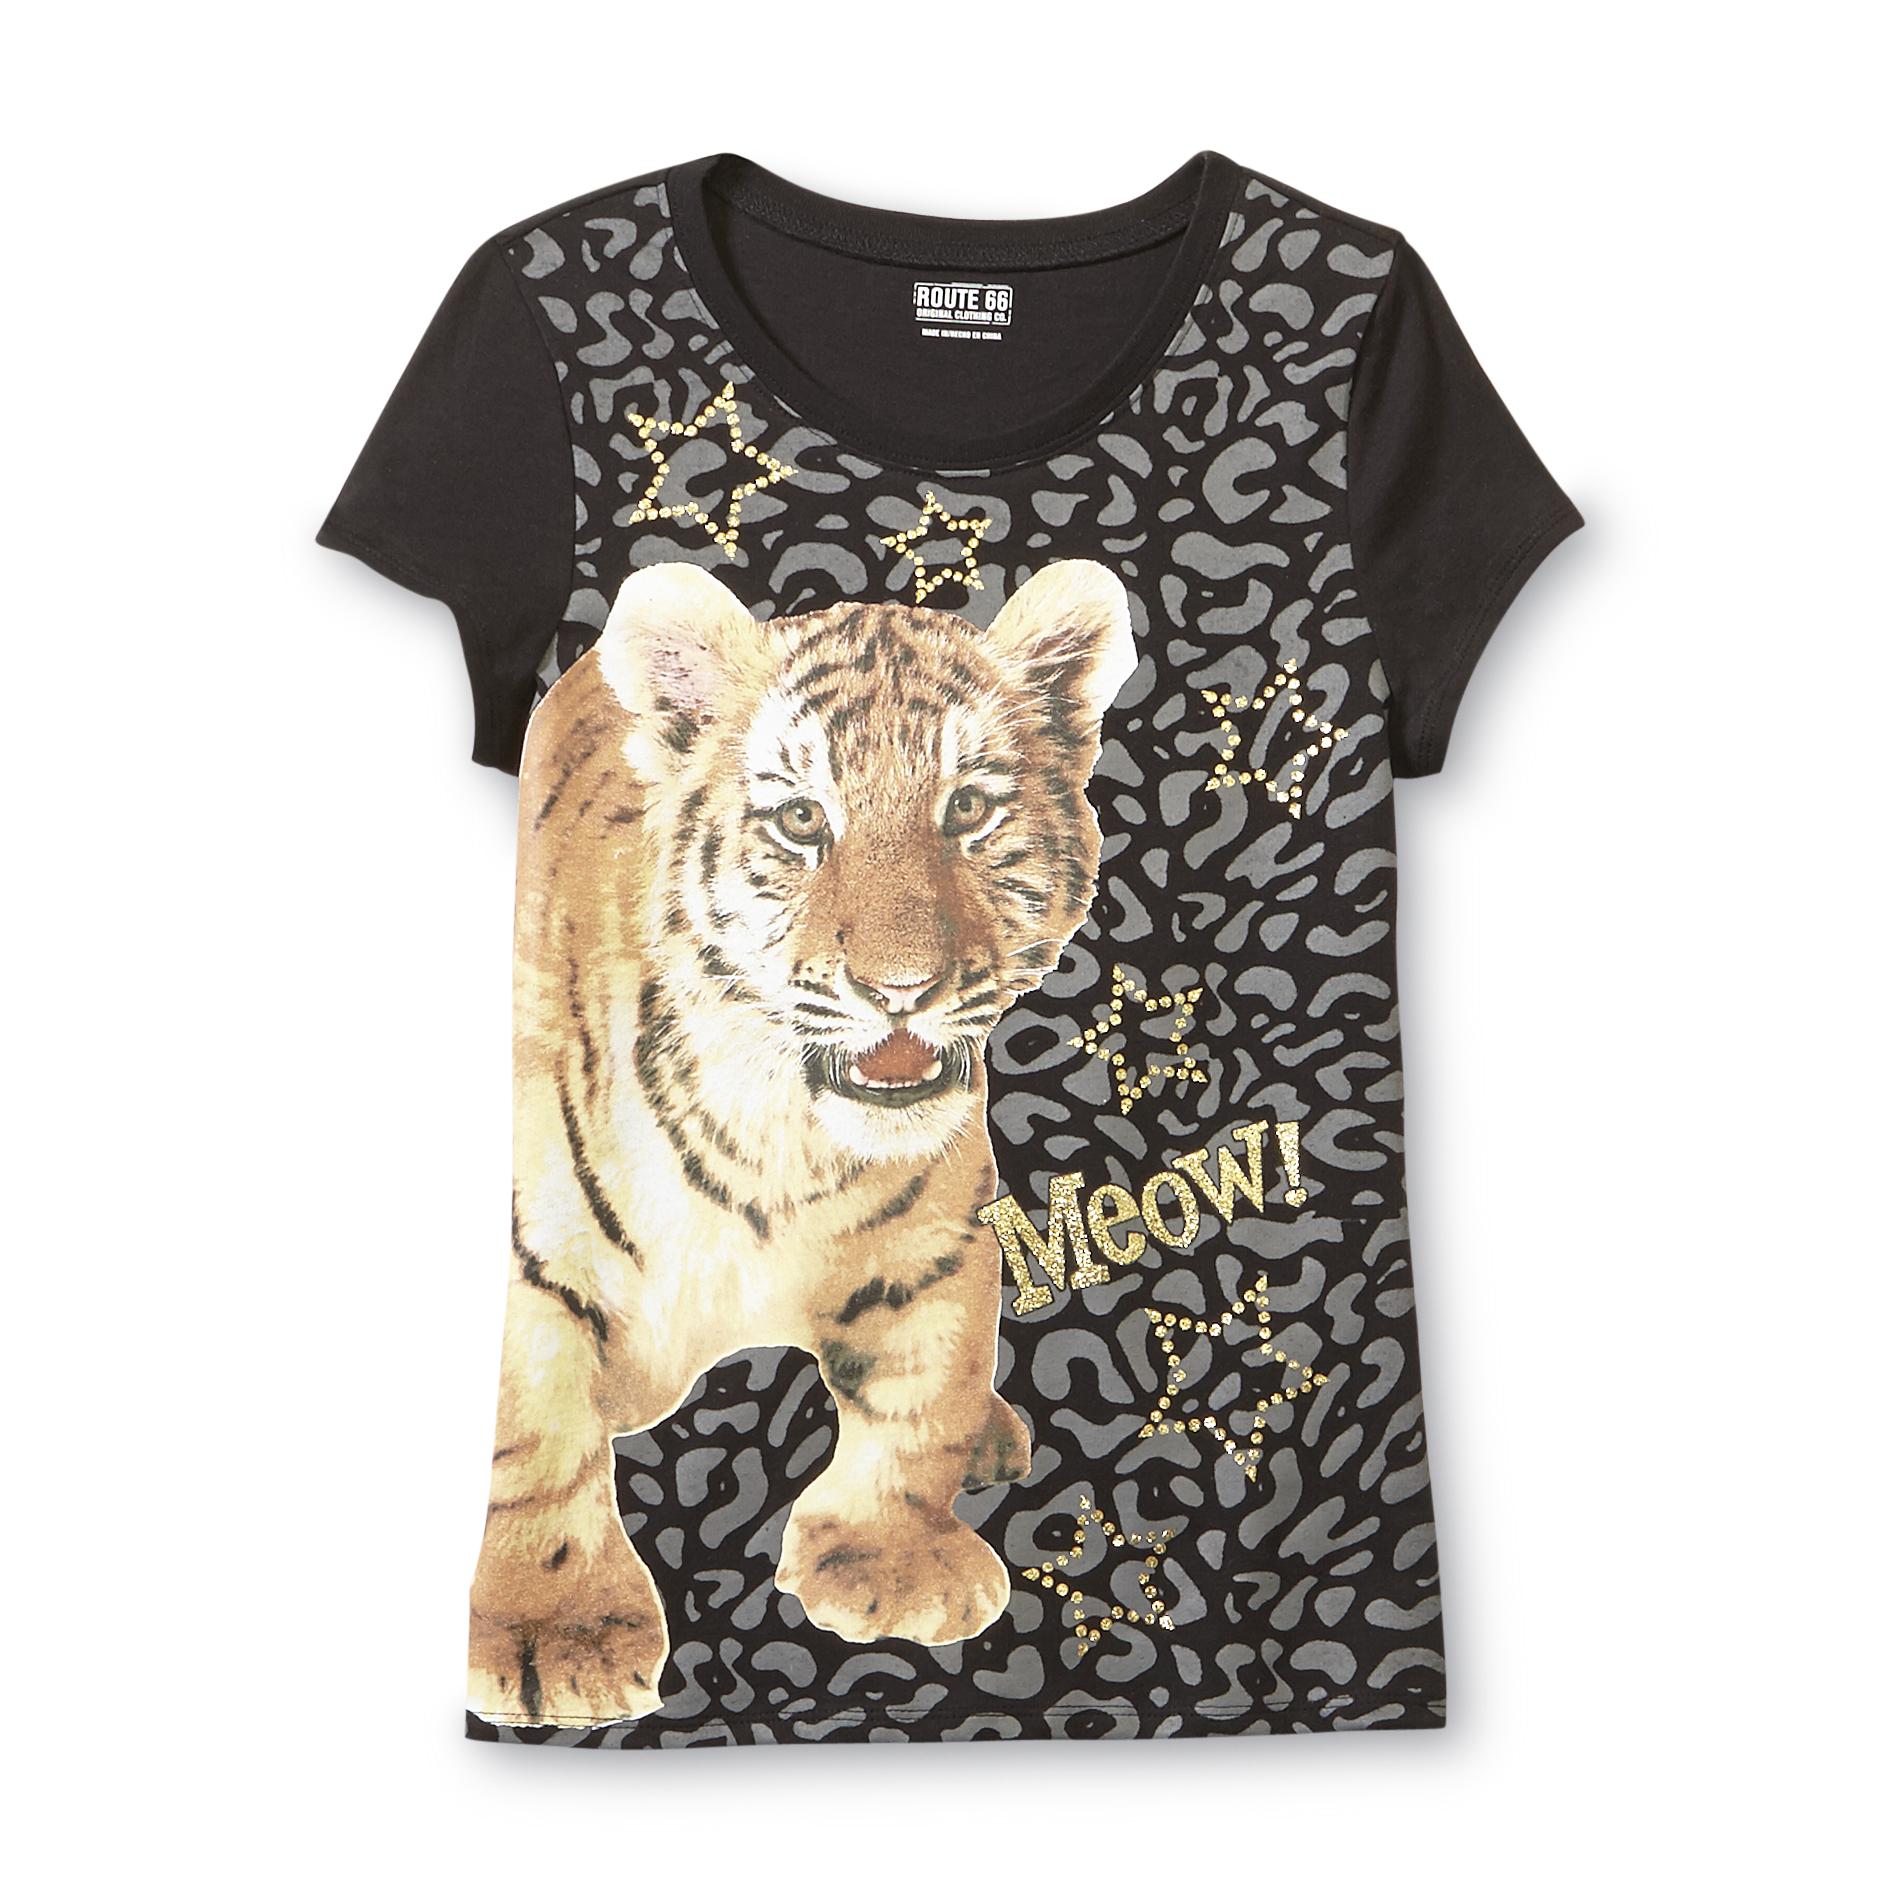 Route 66 Girl's Graphic Top - Tiger